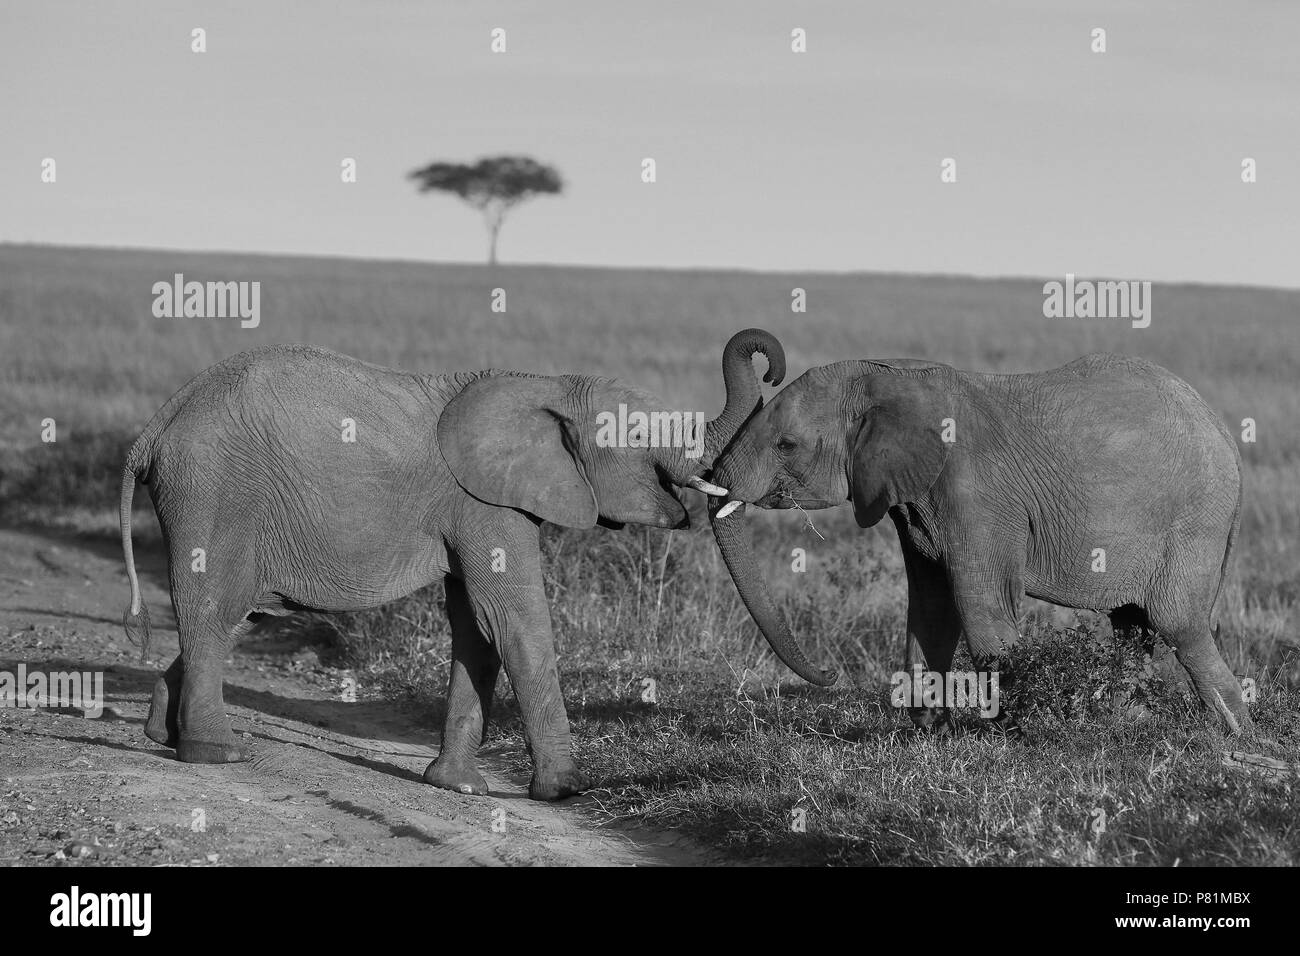 Elephants with tusks playing fighting in savanna Masai Mara Africa black and white photo Stock Photo